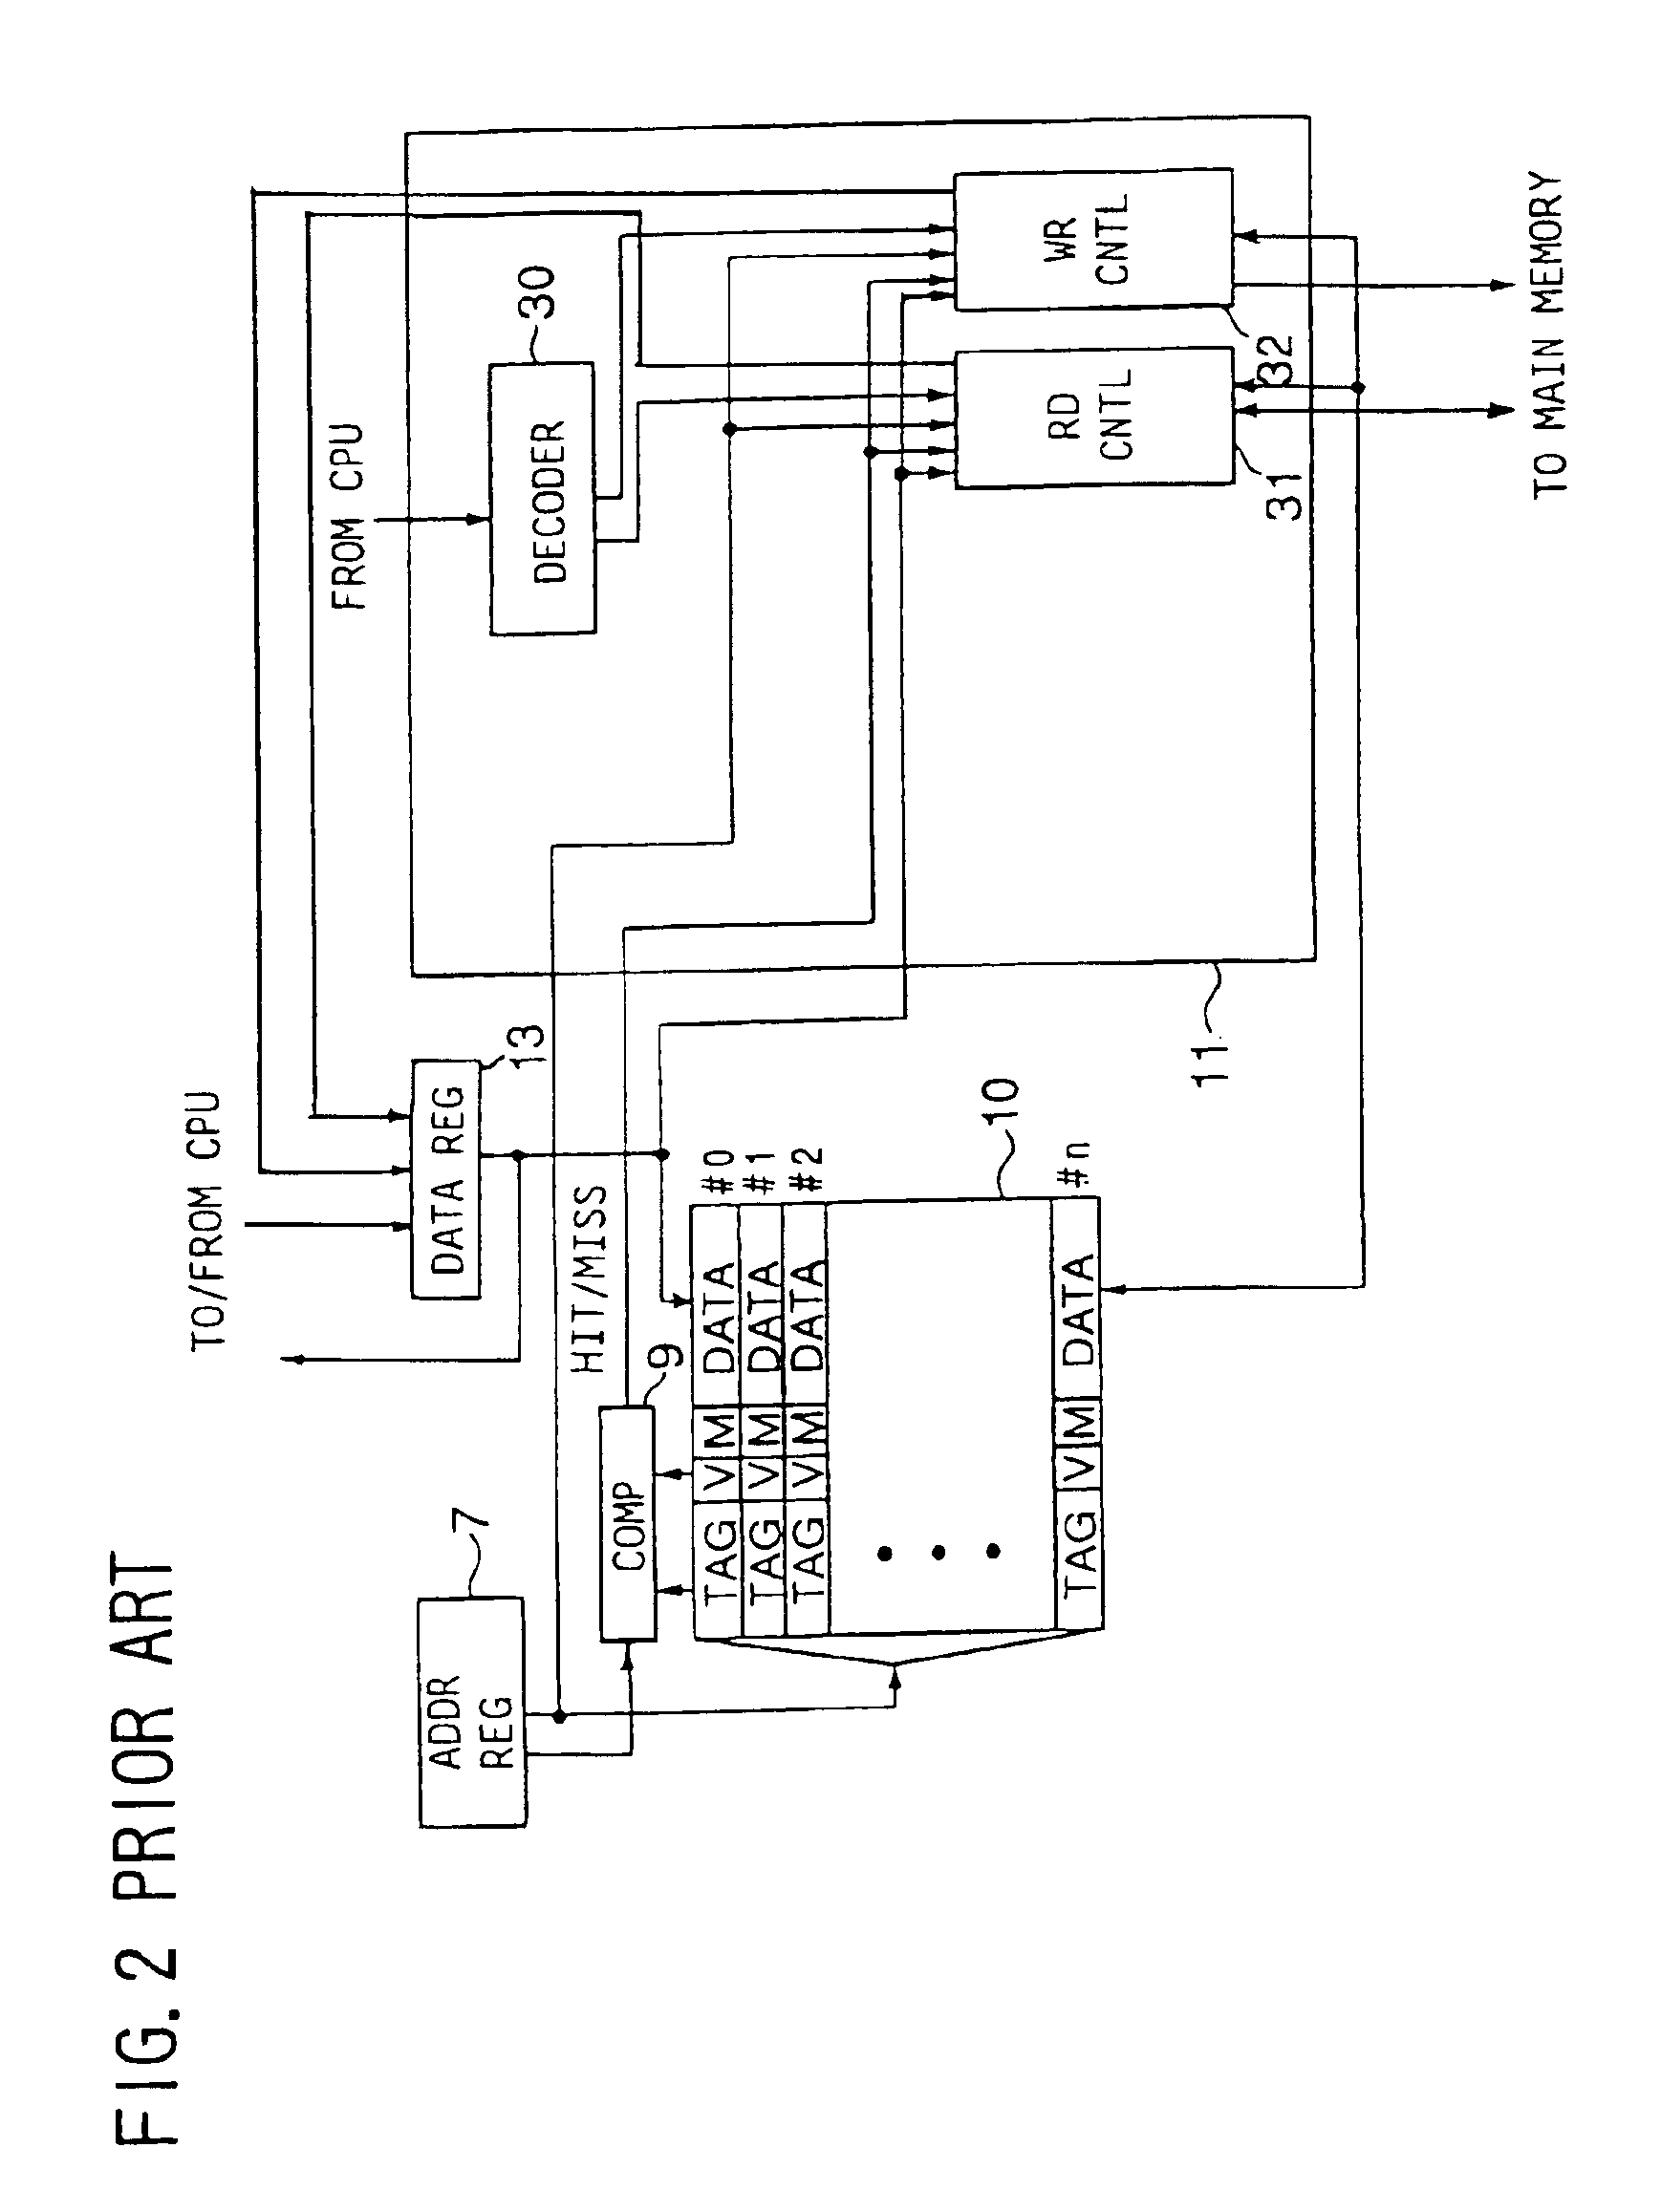 Method of Controlling and addressing a cache memory which acts as a random address memory to increase an access speed to a main memory